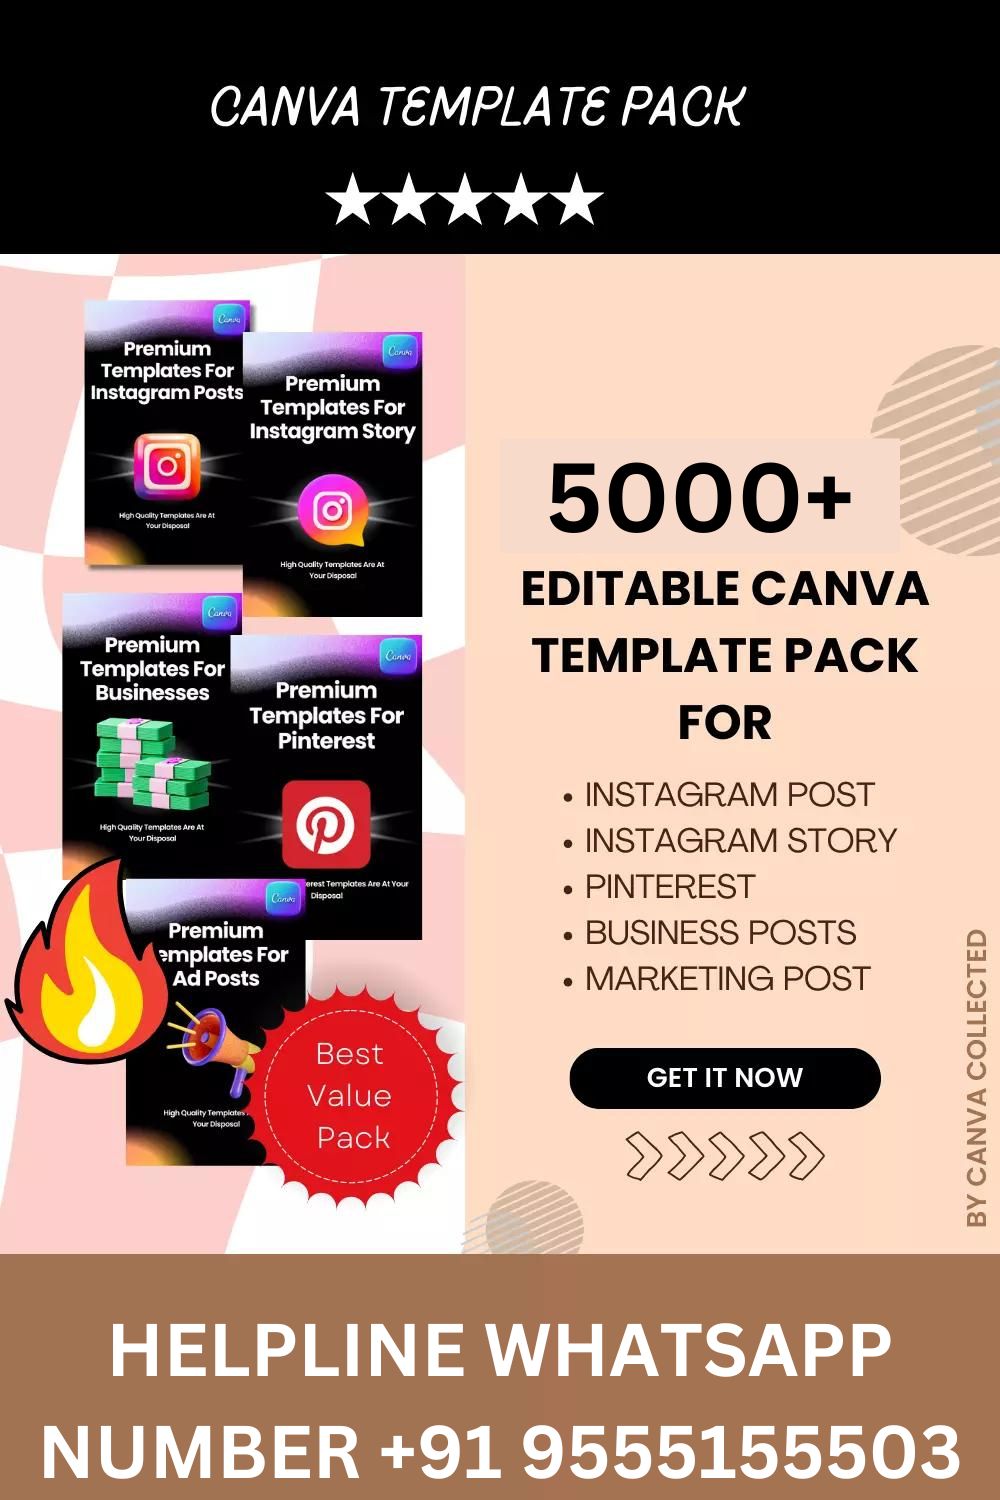 1000+ Canva Template Pack For Instagram Pinterest Business Posts – Social Media Template, Stock Market Canva Templates, Real Estate Canva Templates, Forex Canva Templates,Key Lesson From Books Canva Templates, Pet Training Canva Templates,Key Lesson From Movies Canva Templates, NFT Canva Templates, – Digital Download pinterest preview image.